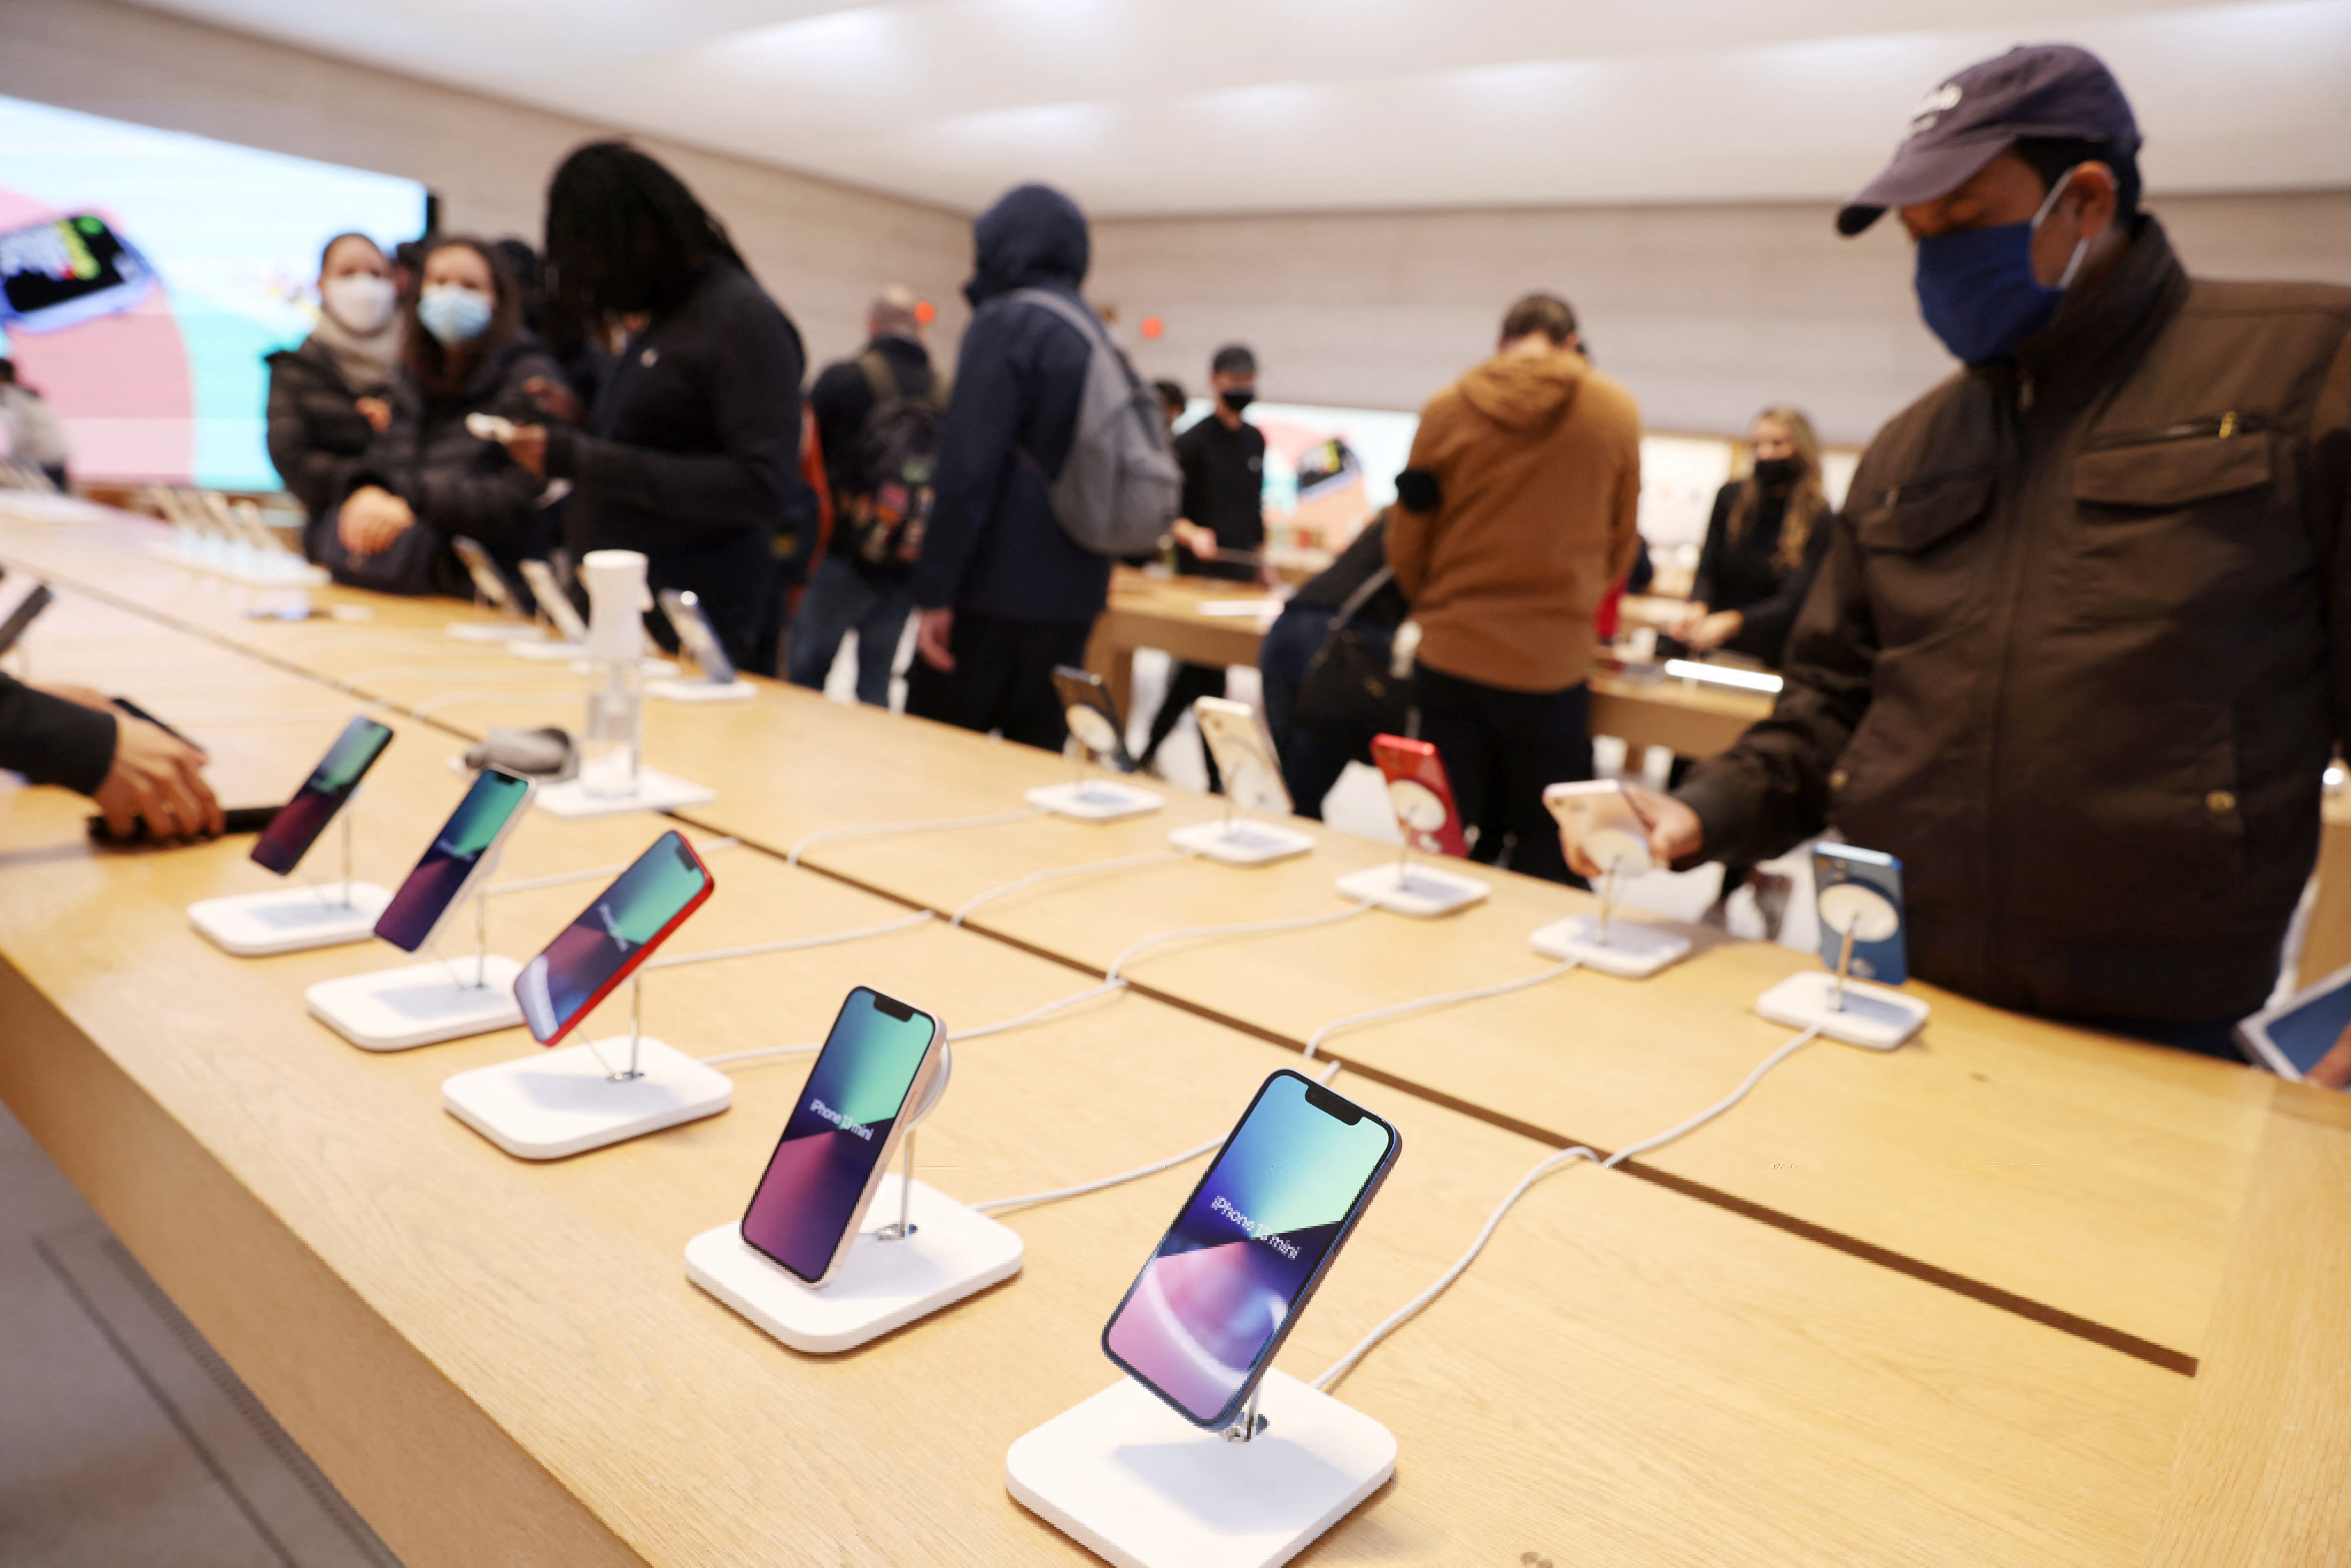 FILE PHOTO - People shop for smartphones in an Apple Store in Manhattan, New York City